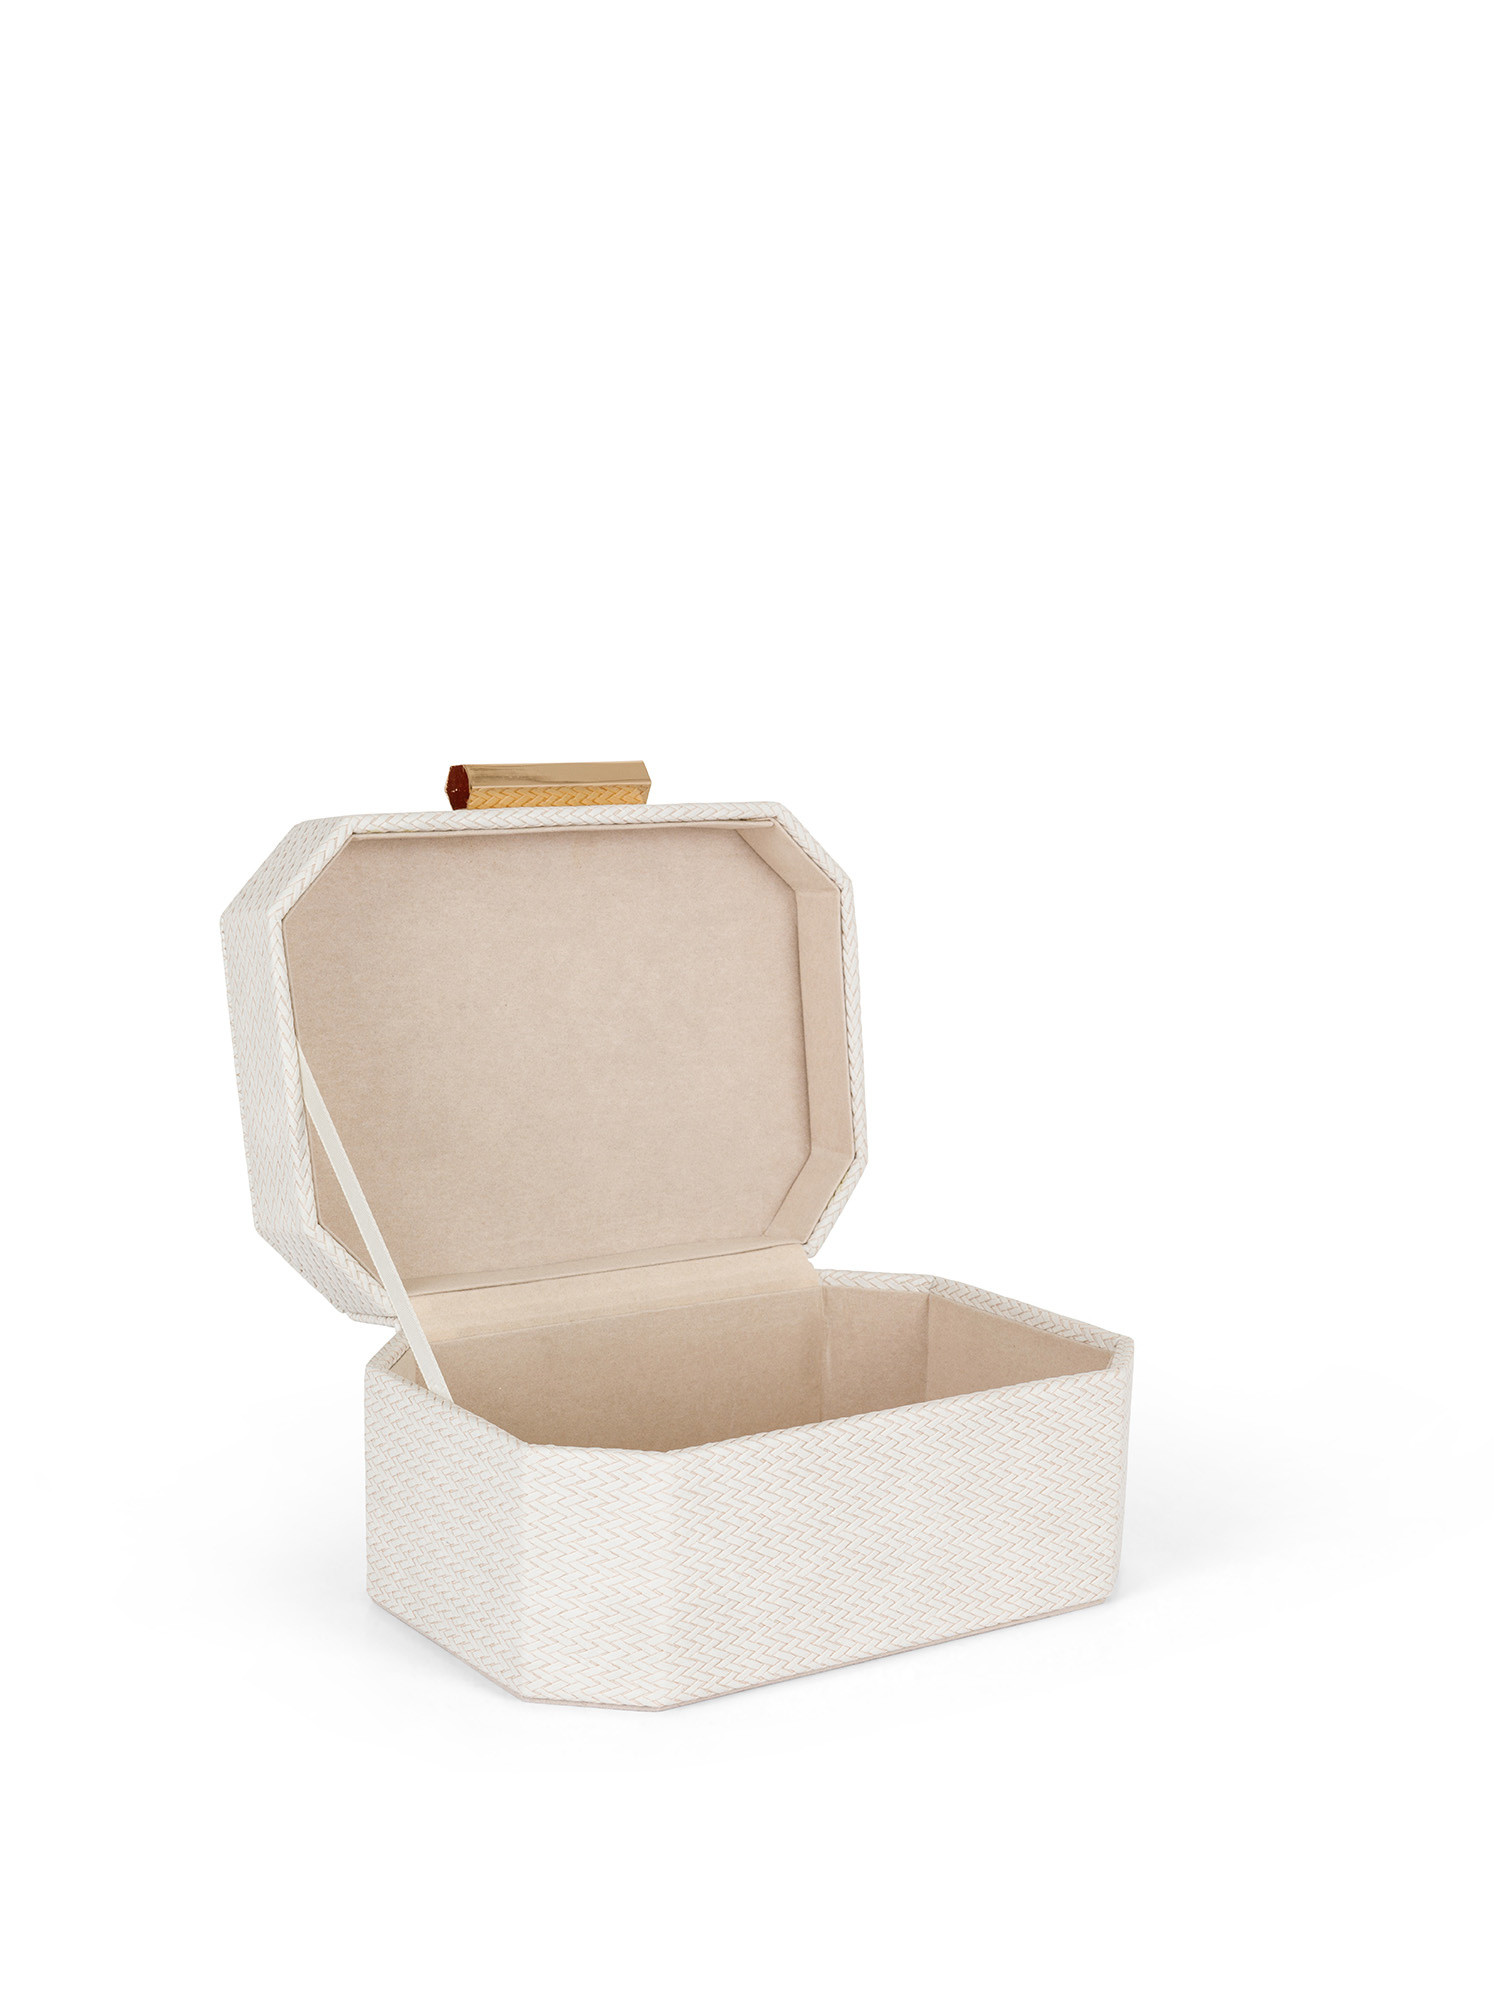 Jewelery box with golden closure, Ivory, large image number 1